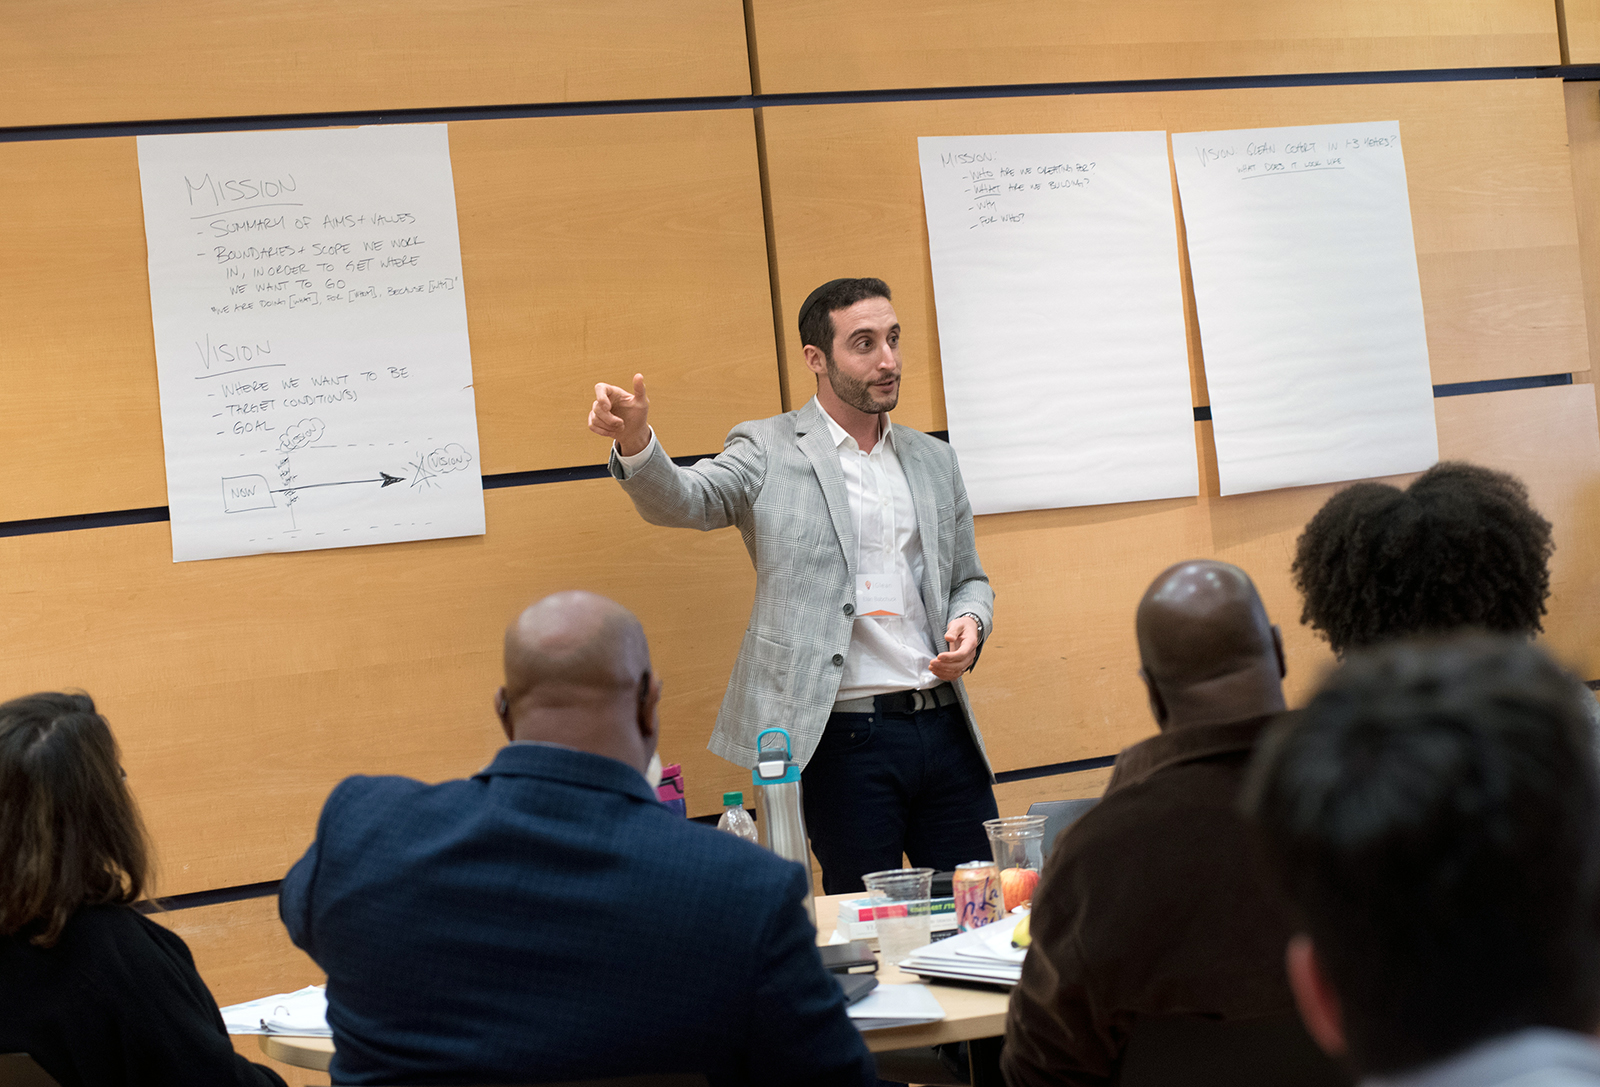 Glean Network founder Elan Babchuck leads a group session in 2017. Photo by Melanie Einzig